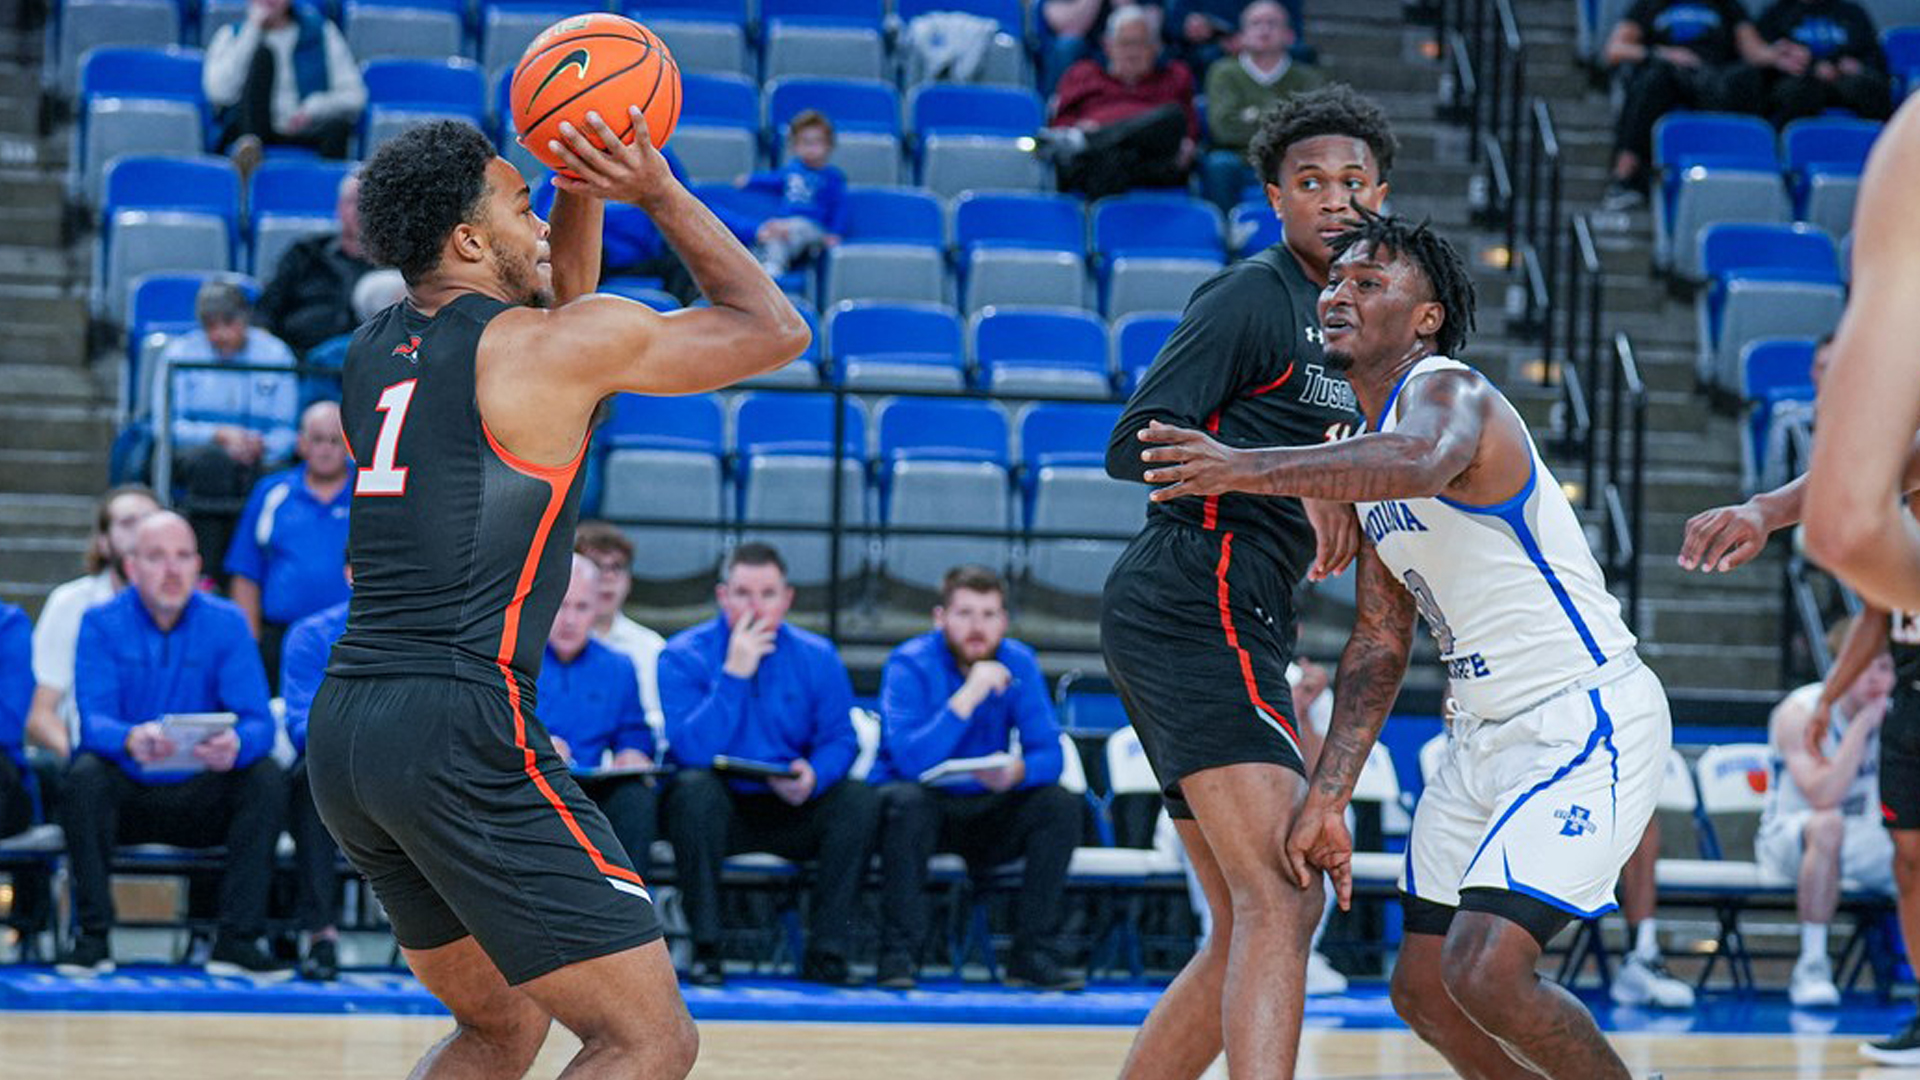 Pioneers fall 83-74 at UVA Wise for third straight loss